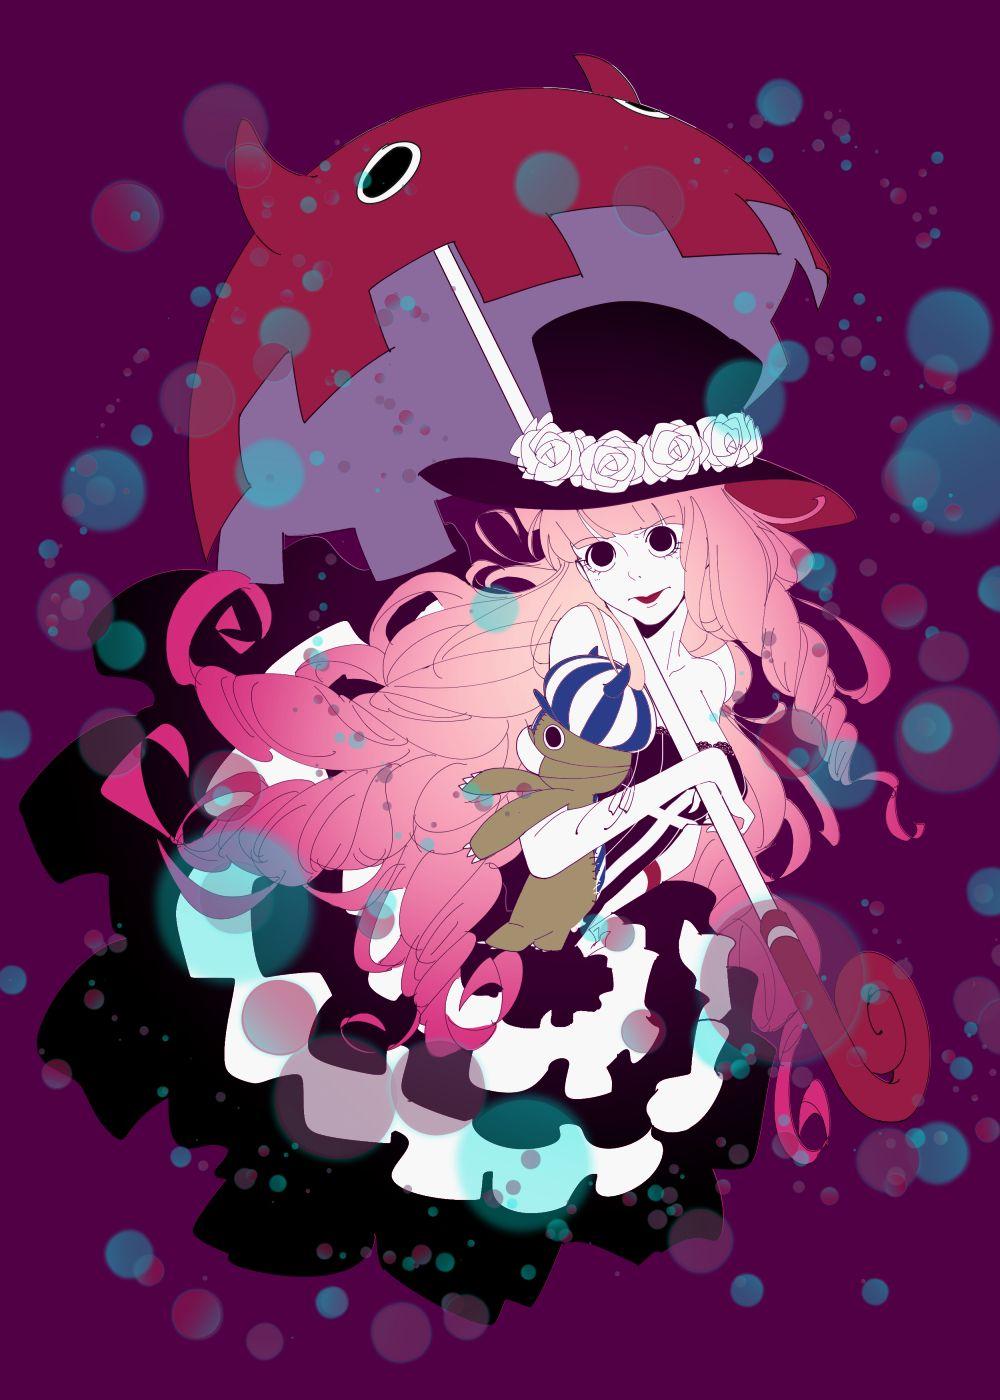 Perona One Piece wallpapers for desktop download free Perona One Piece  pictures and backgrounds for PC  moborg